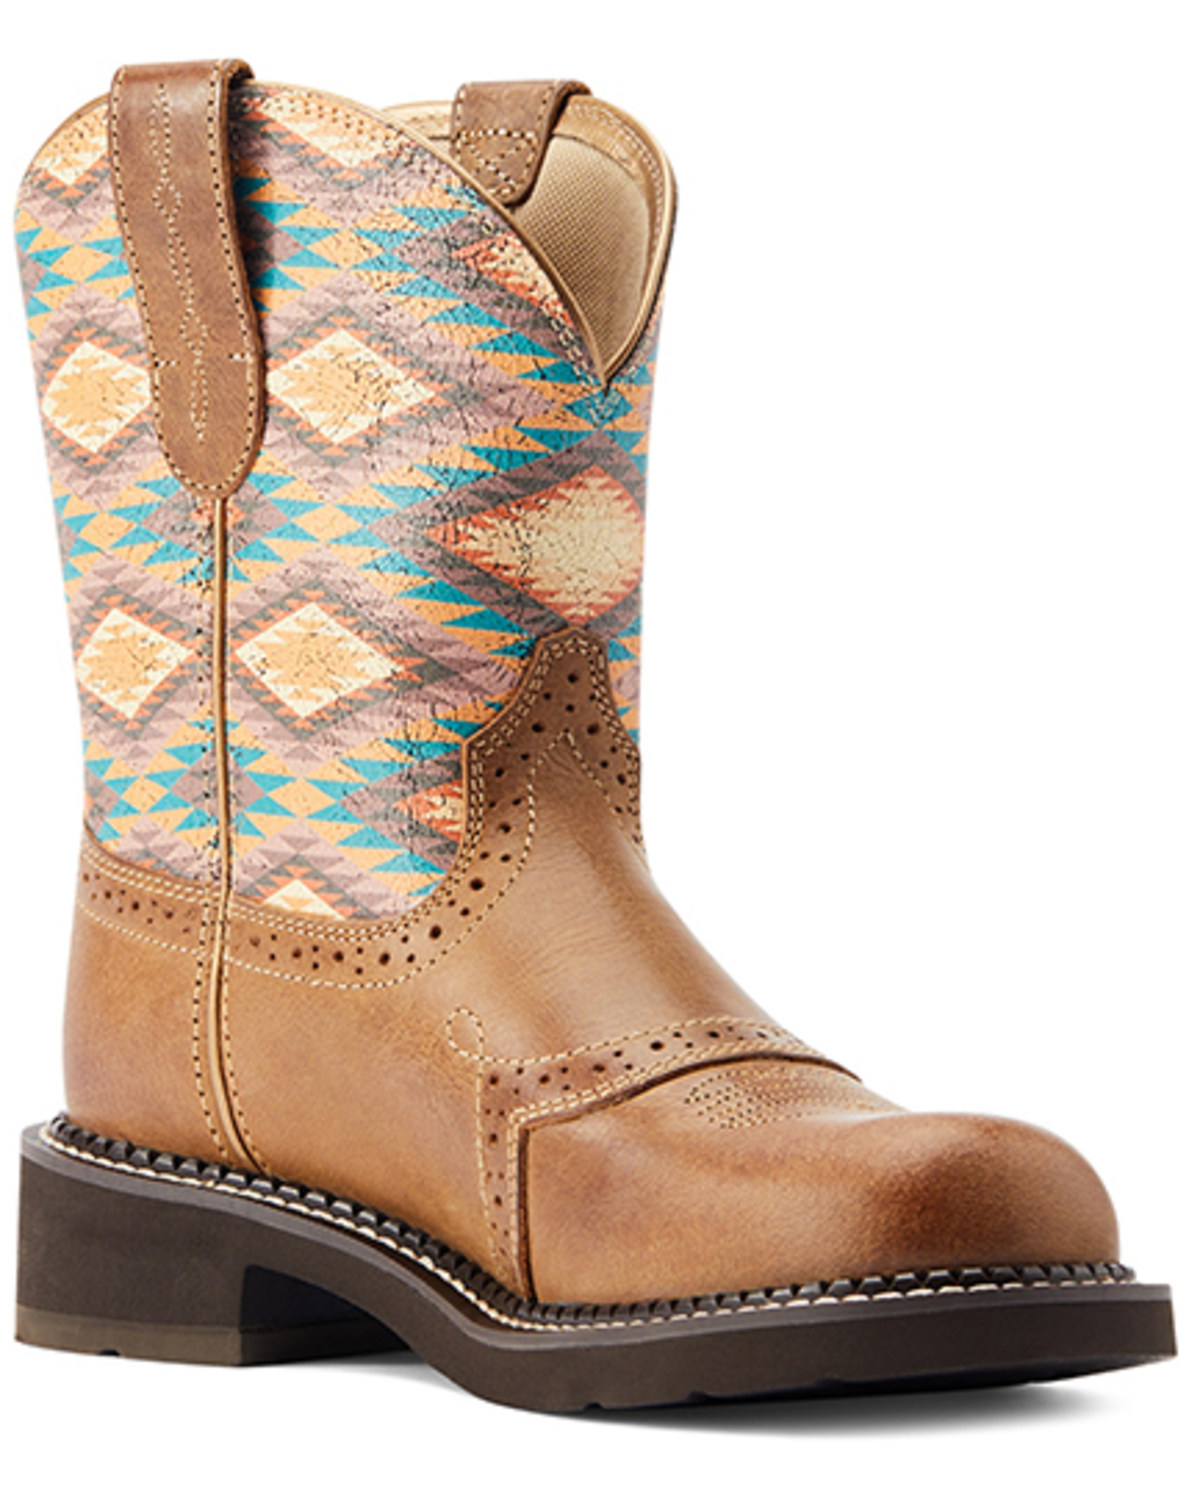 Ariat Women's Fatbaby Heritage Western Boots - Round Toe